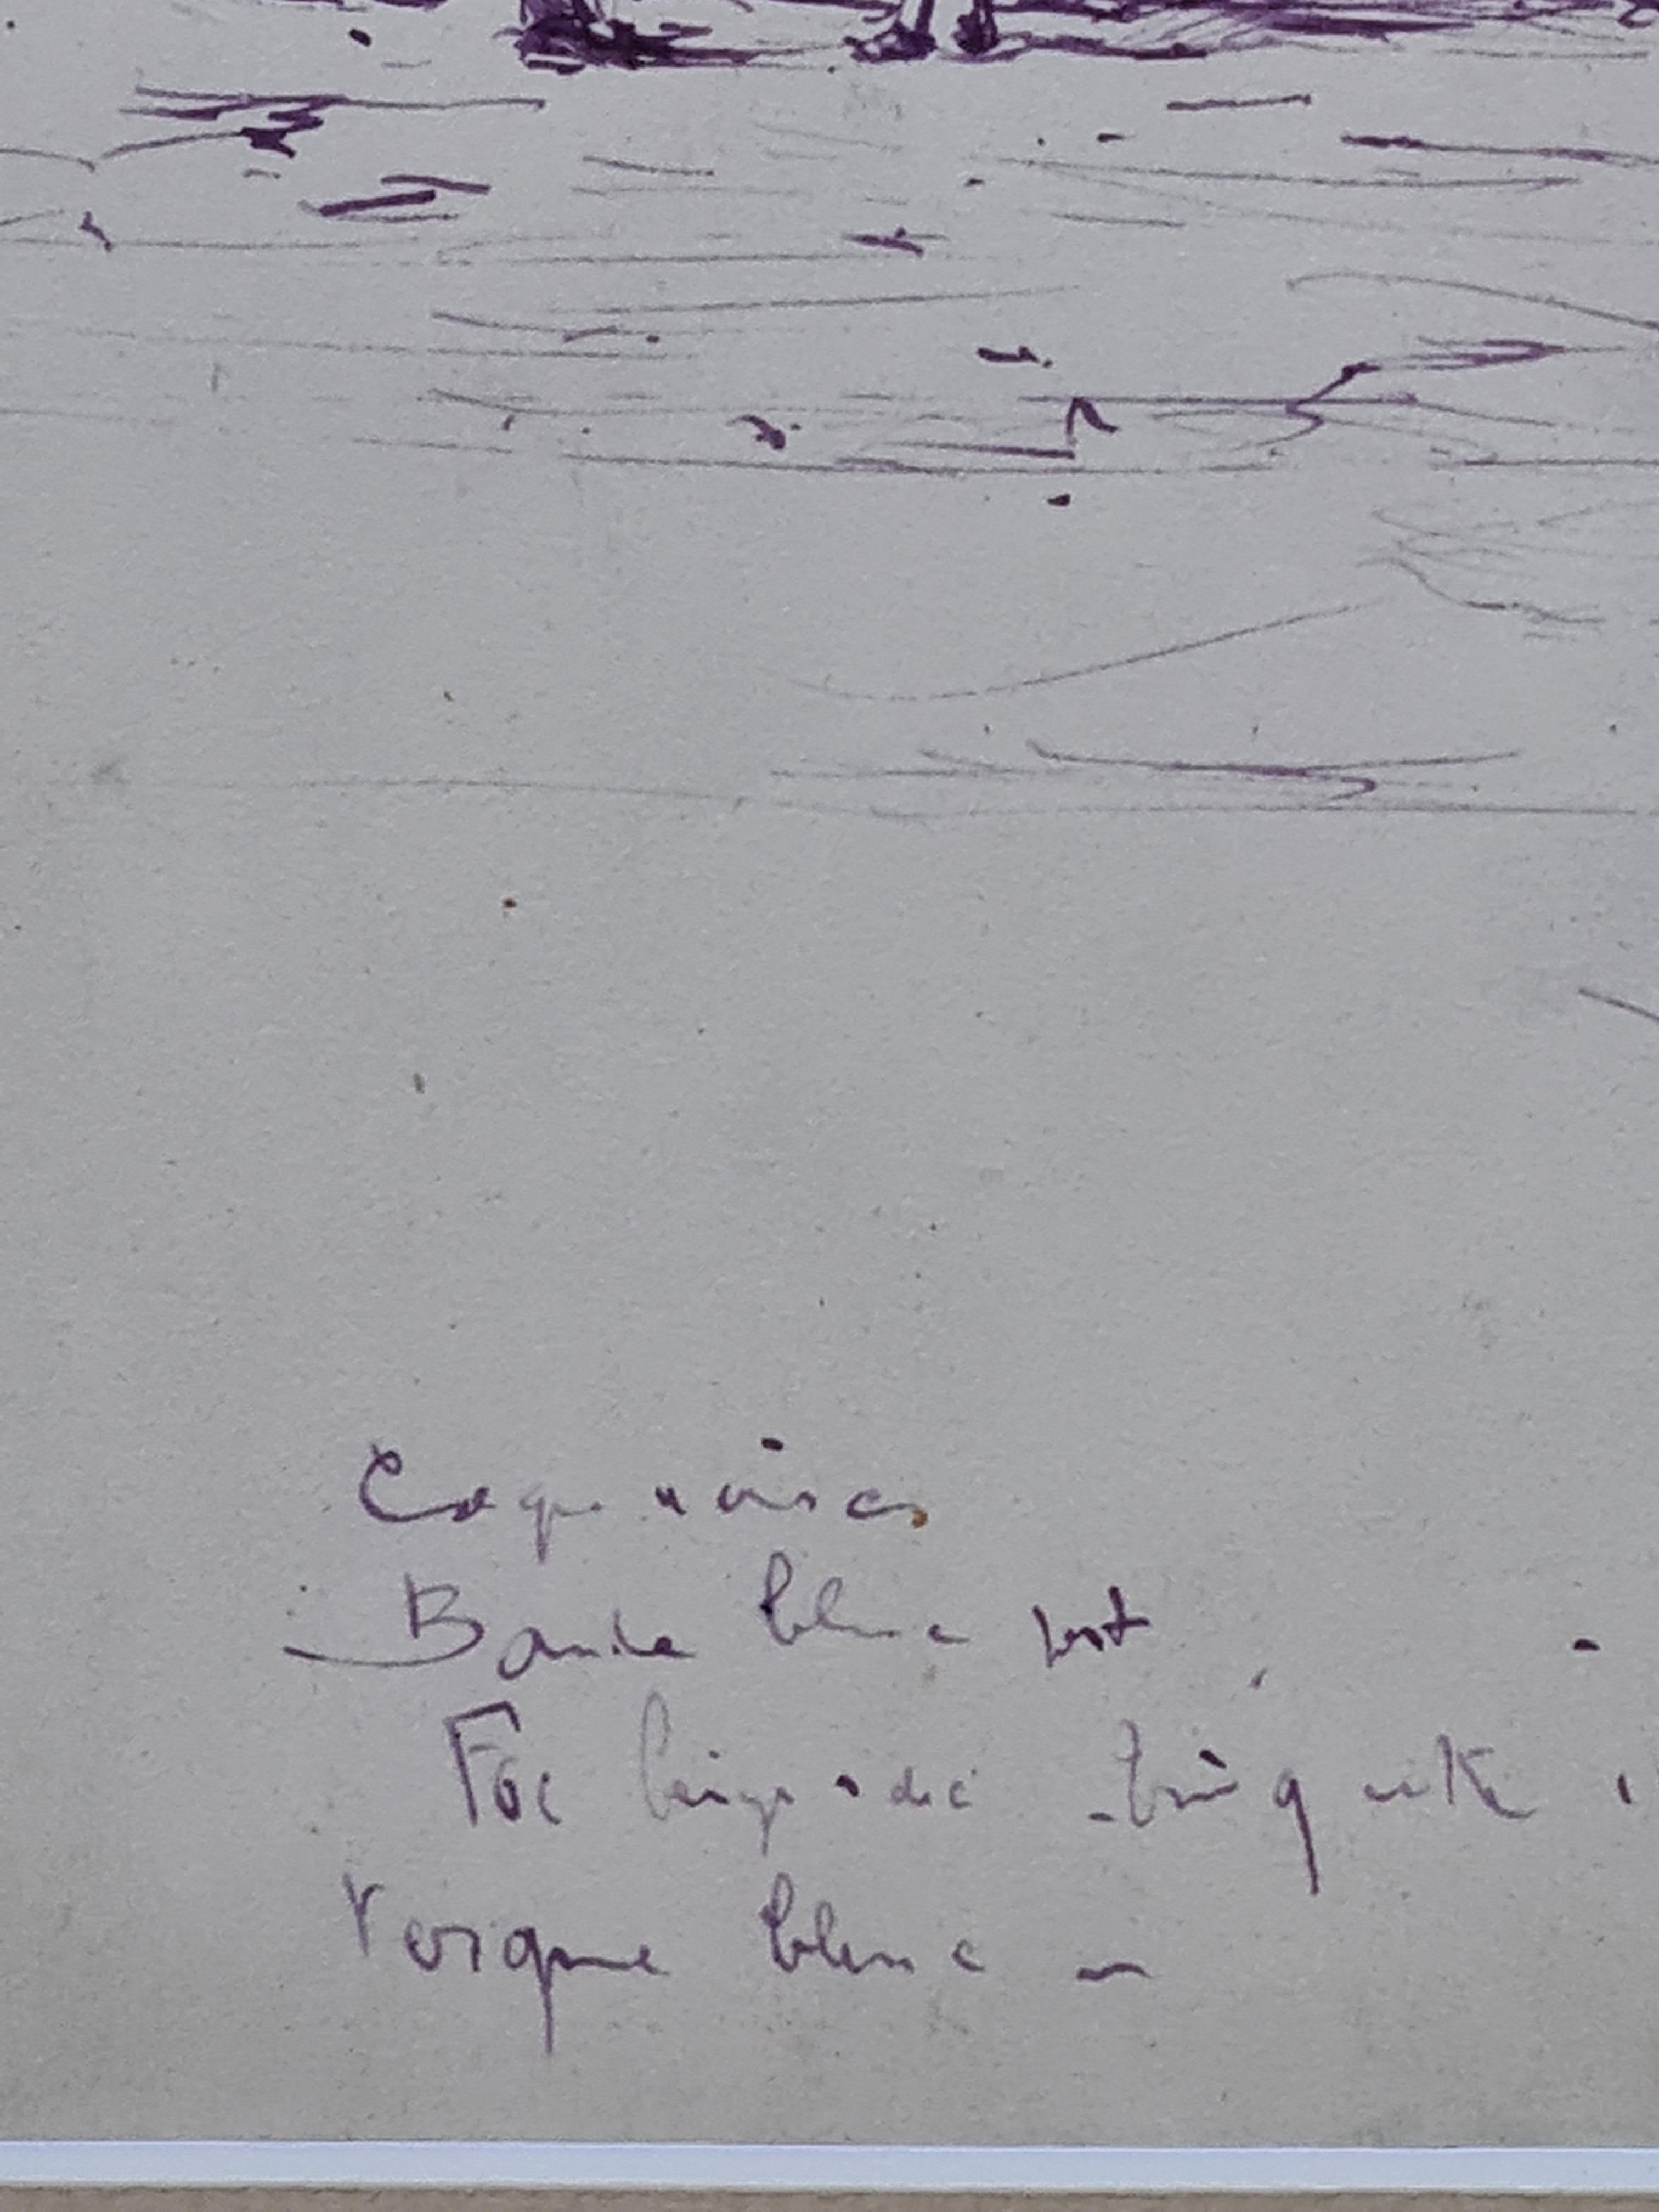 Late 19th century mauve ink drawing on paper of fishing boats at  harbour by noted French artist Georges Ricard-Cordingley. The drawing is signed bottom left and carries various annotations and another small sketch. The drawing is presented in a